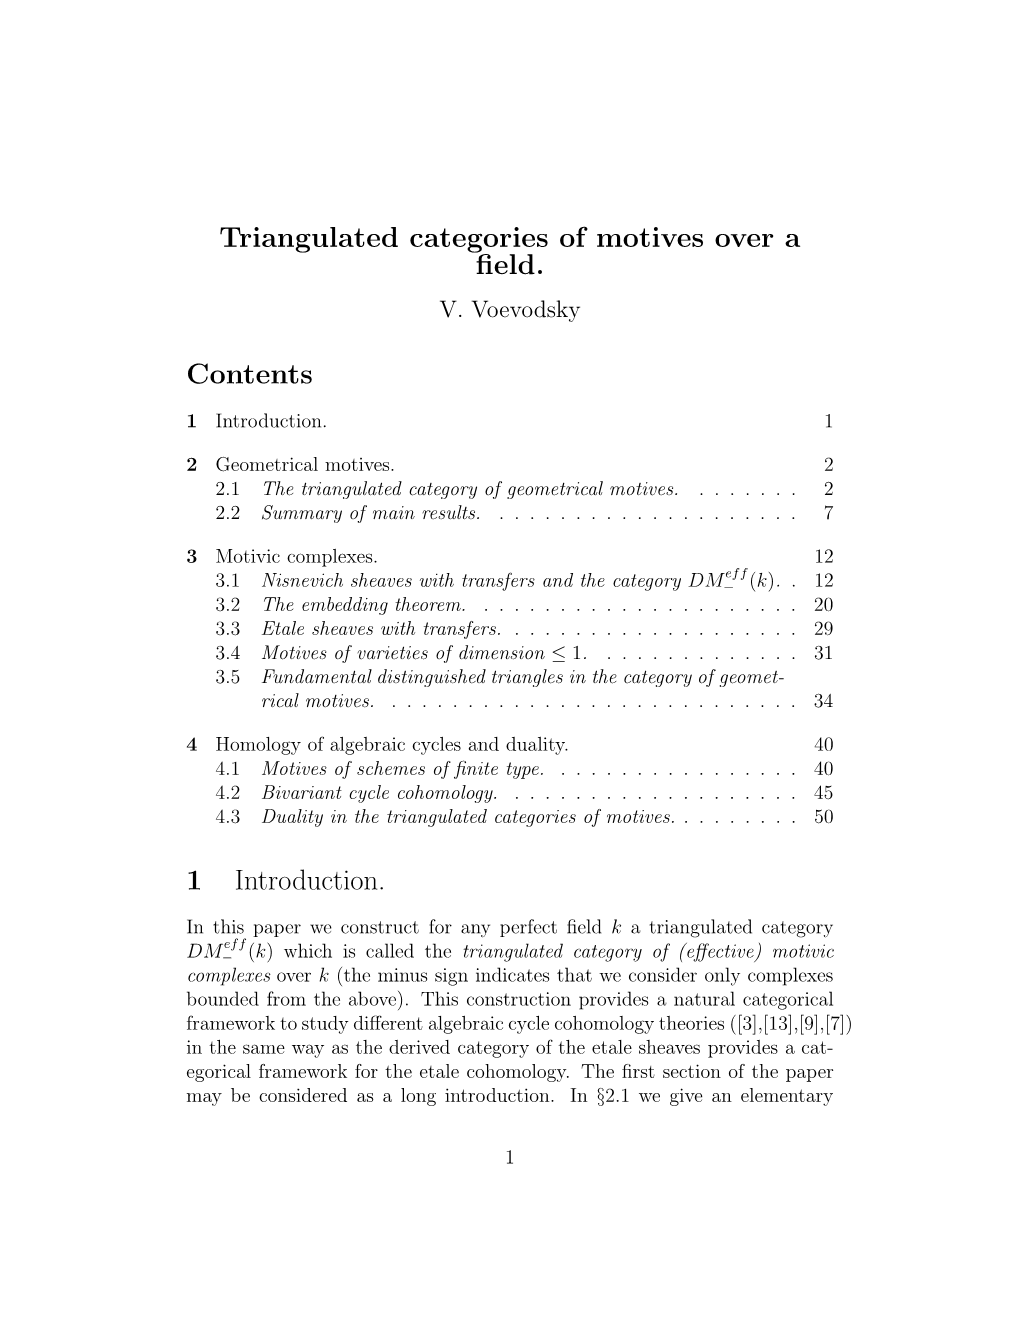 Triangulated Categories of Motives Over a Field. Contents 1 Introduction